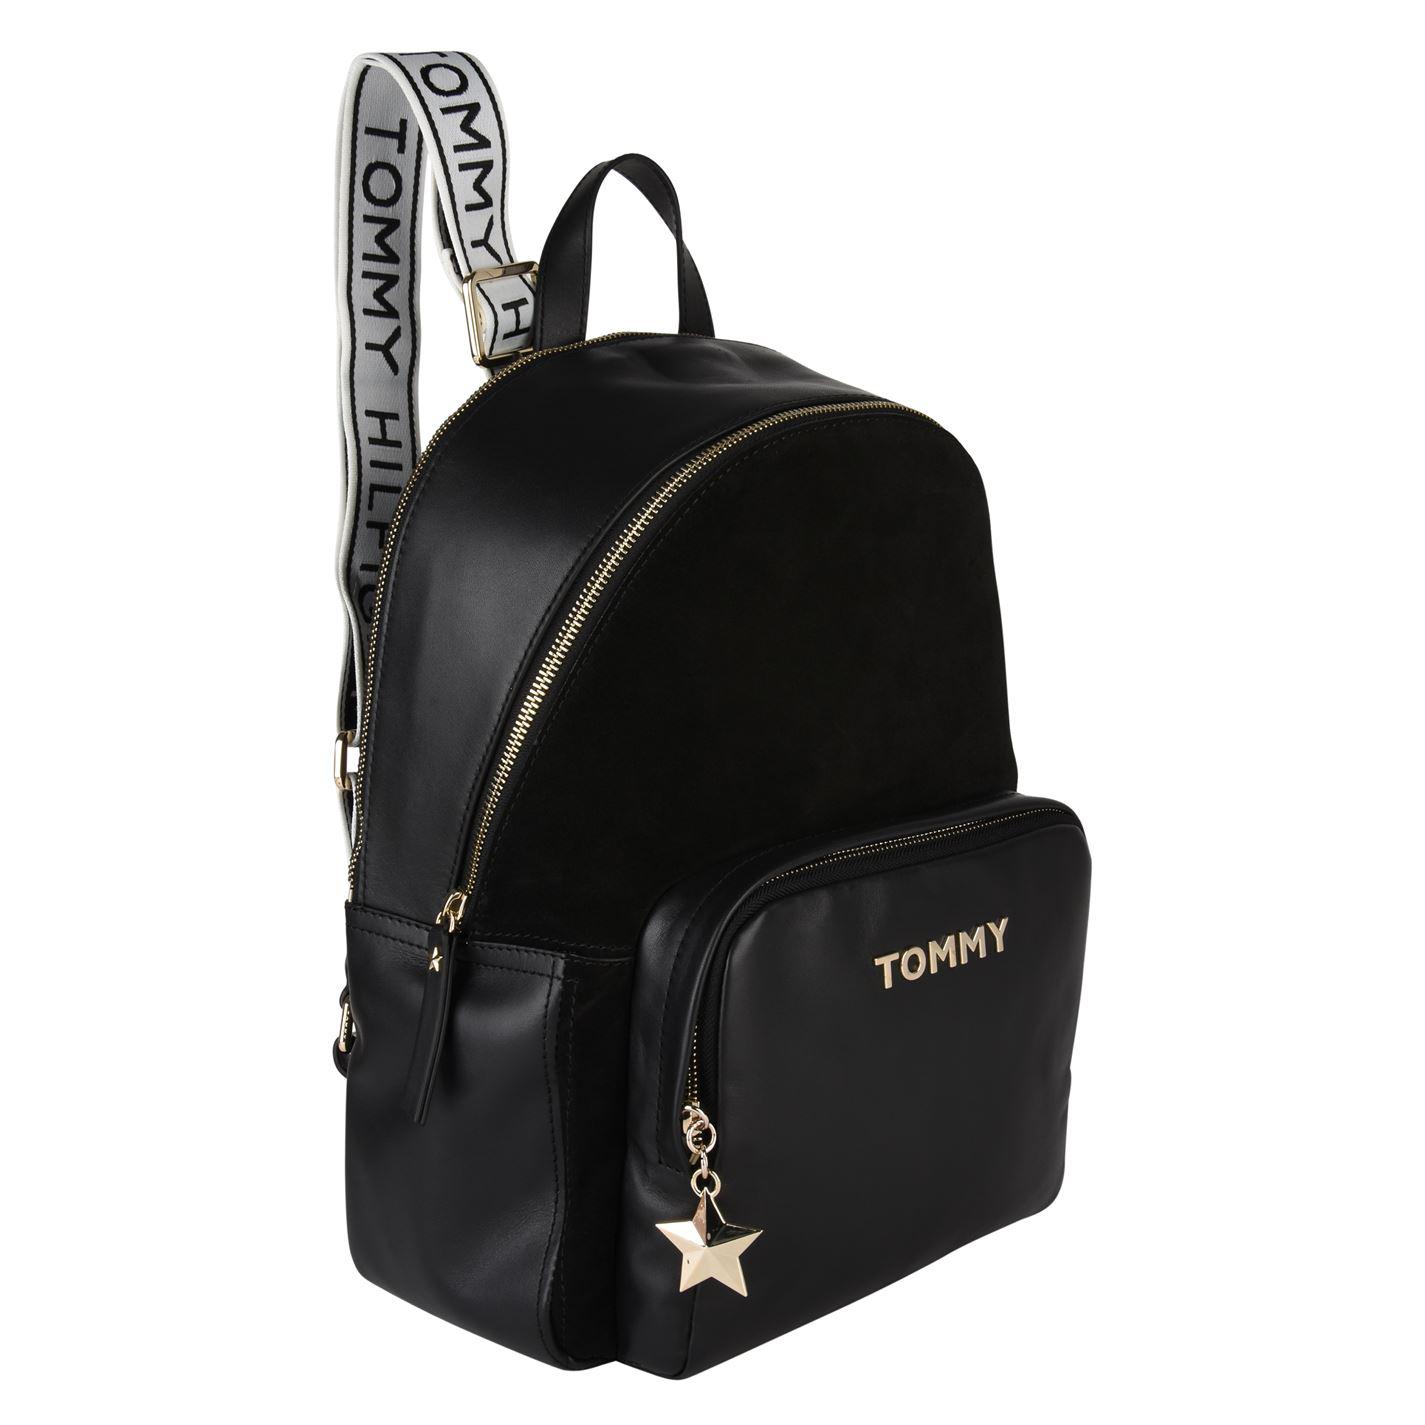 Tommy Hilfiger Leather Star Charm Backpack in Black - Lyst